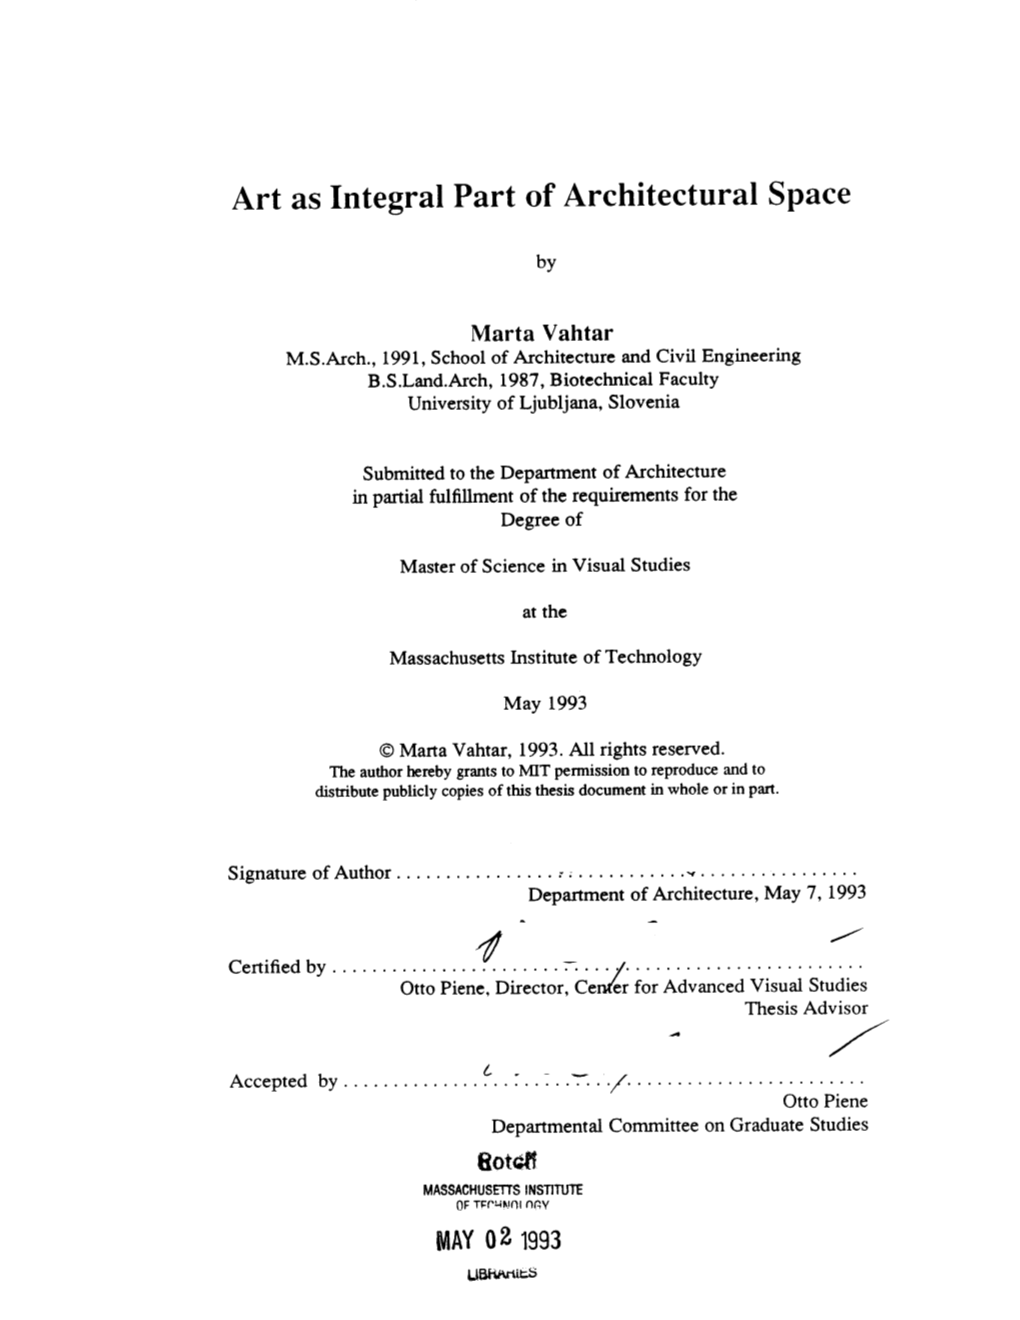 Art As Integral Part of Architectural Space